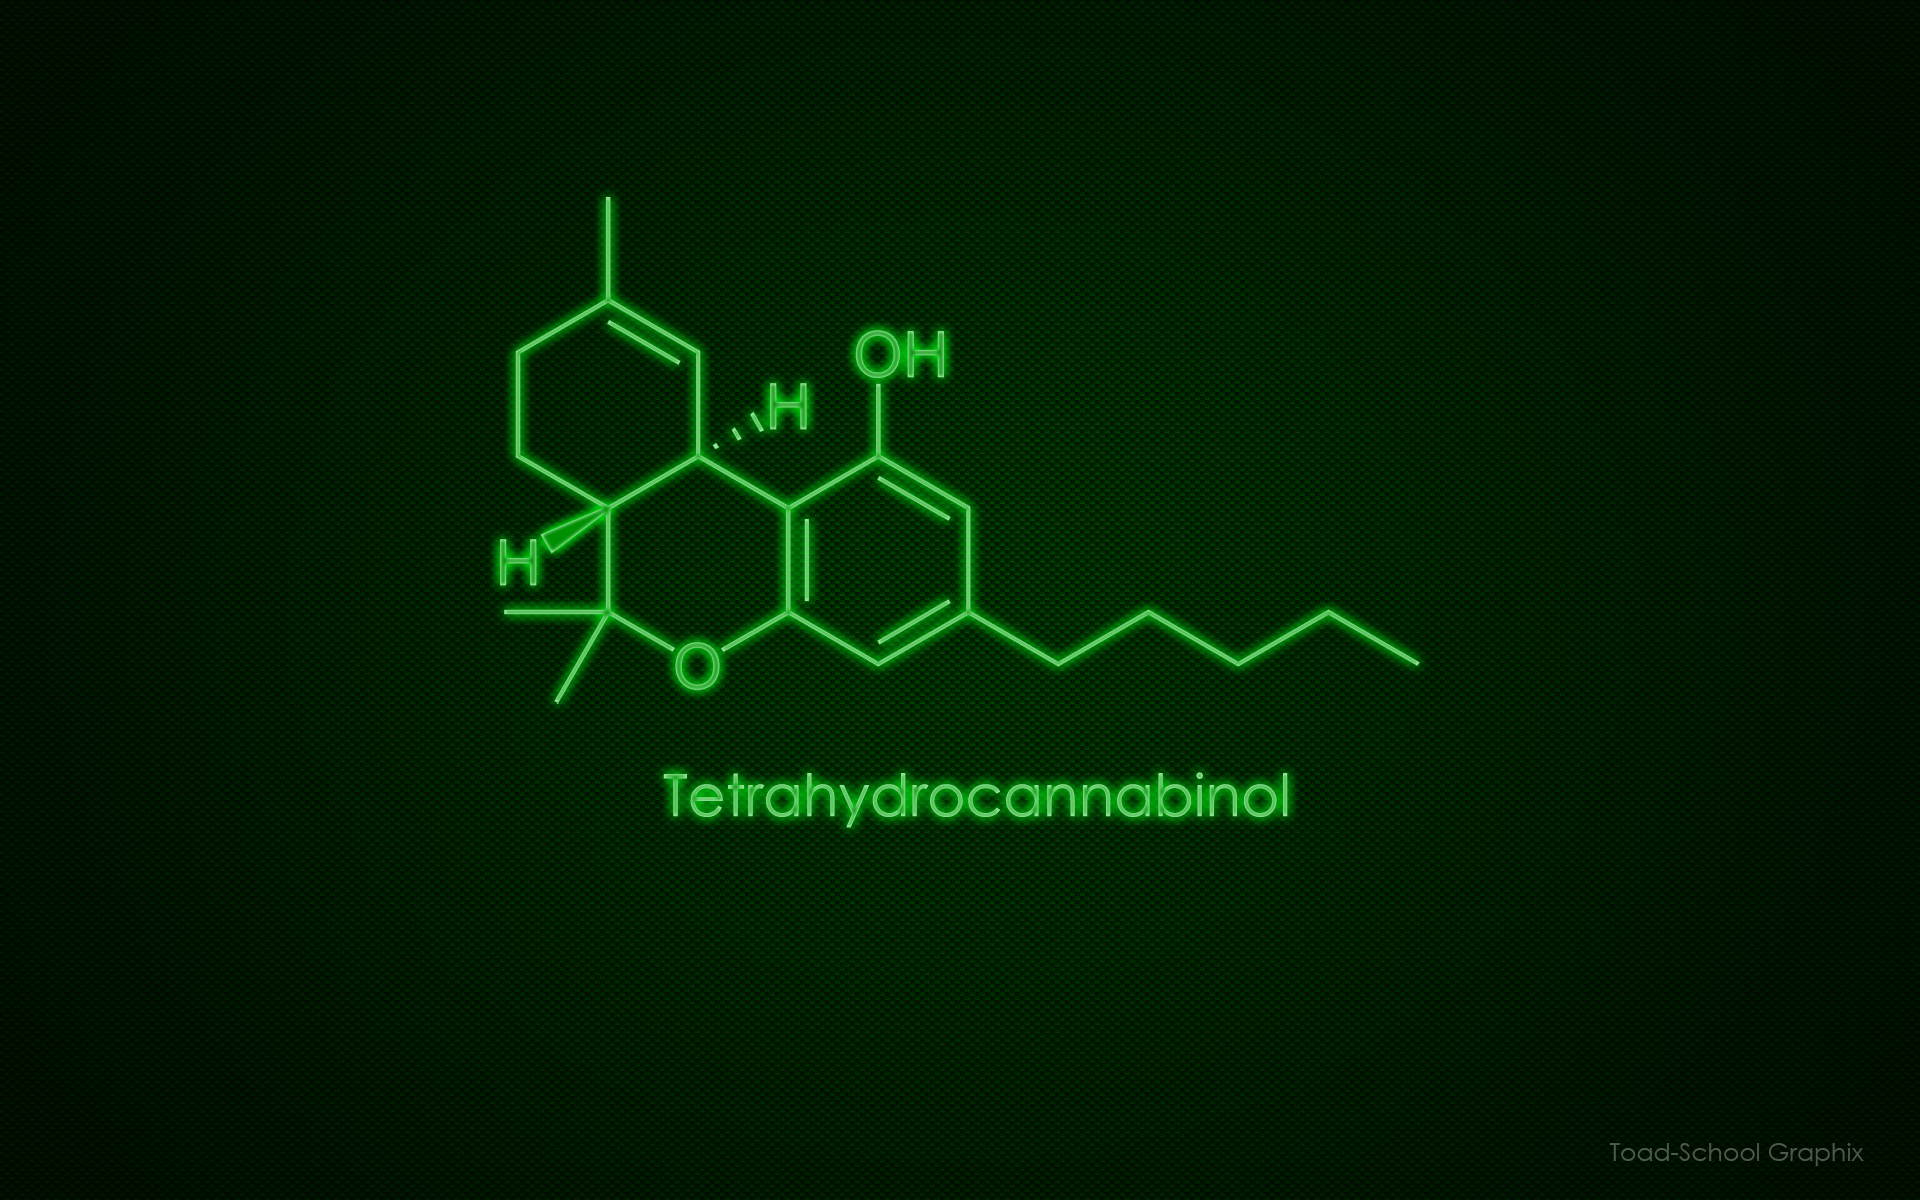 The Science Behind Thc Chemistry Work That Started Growth Of